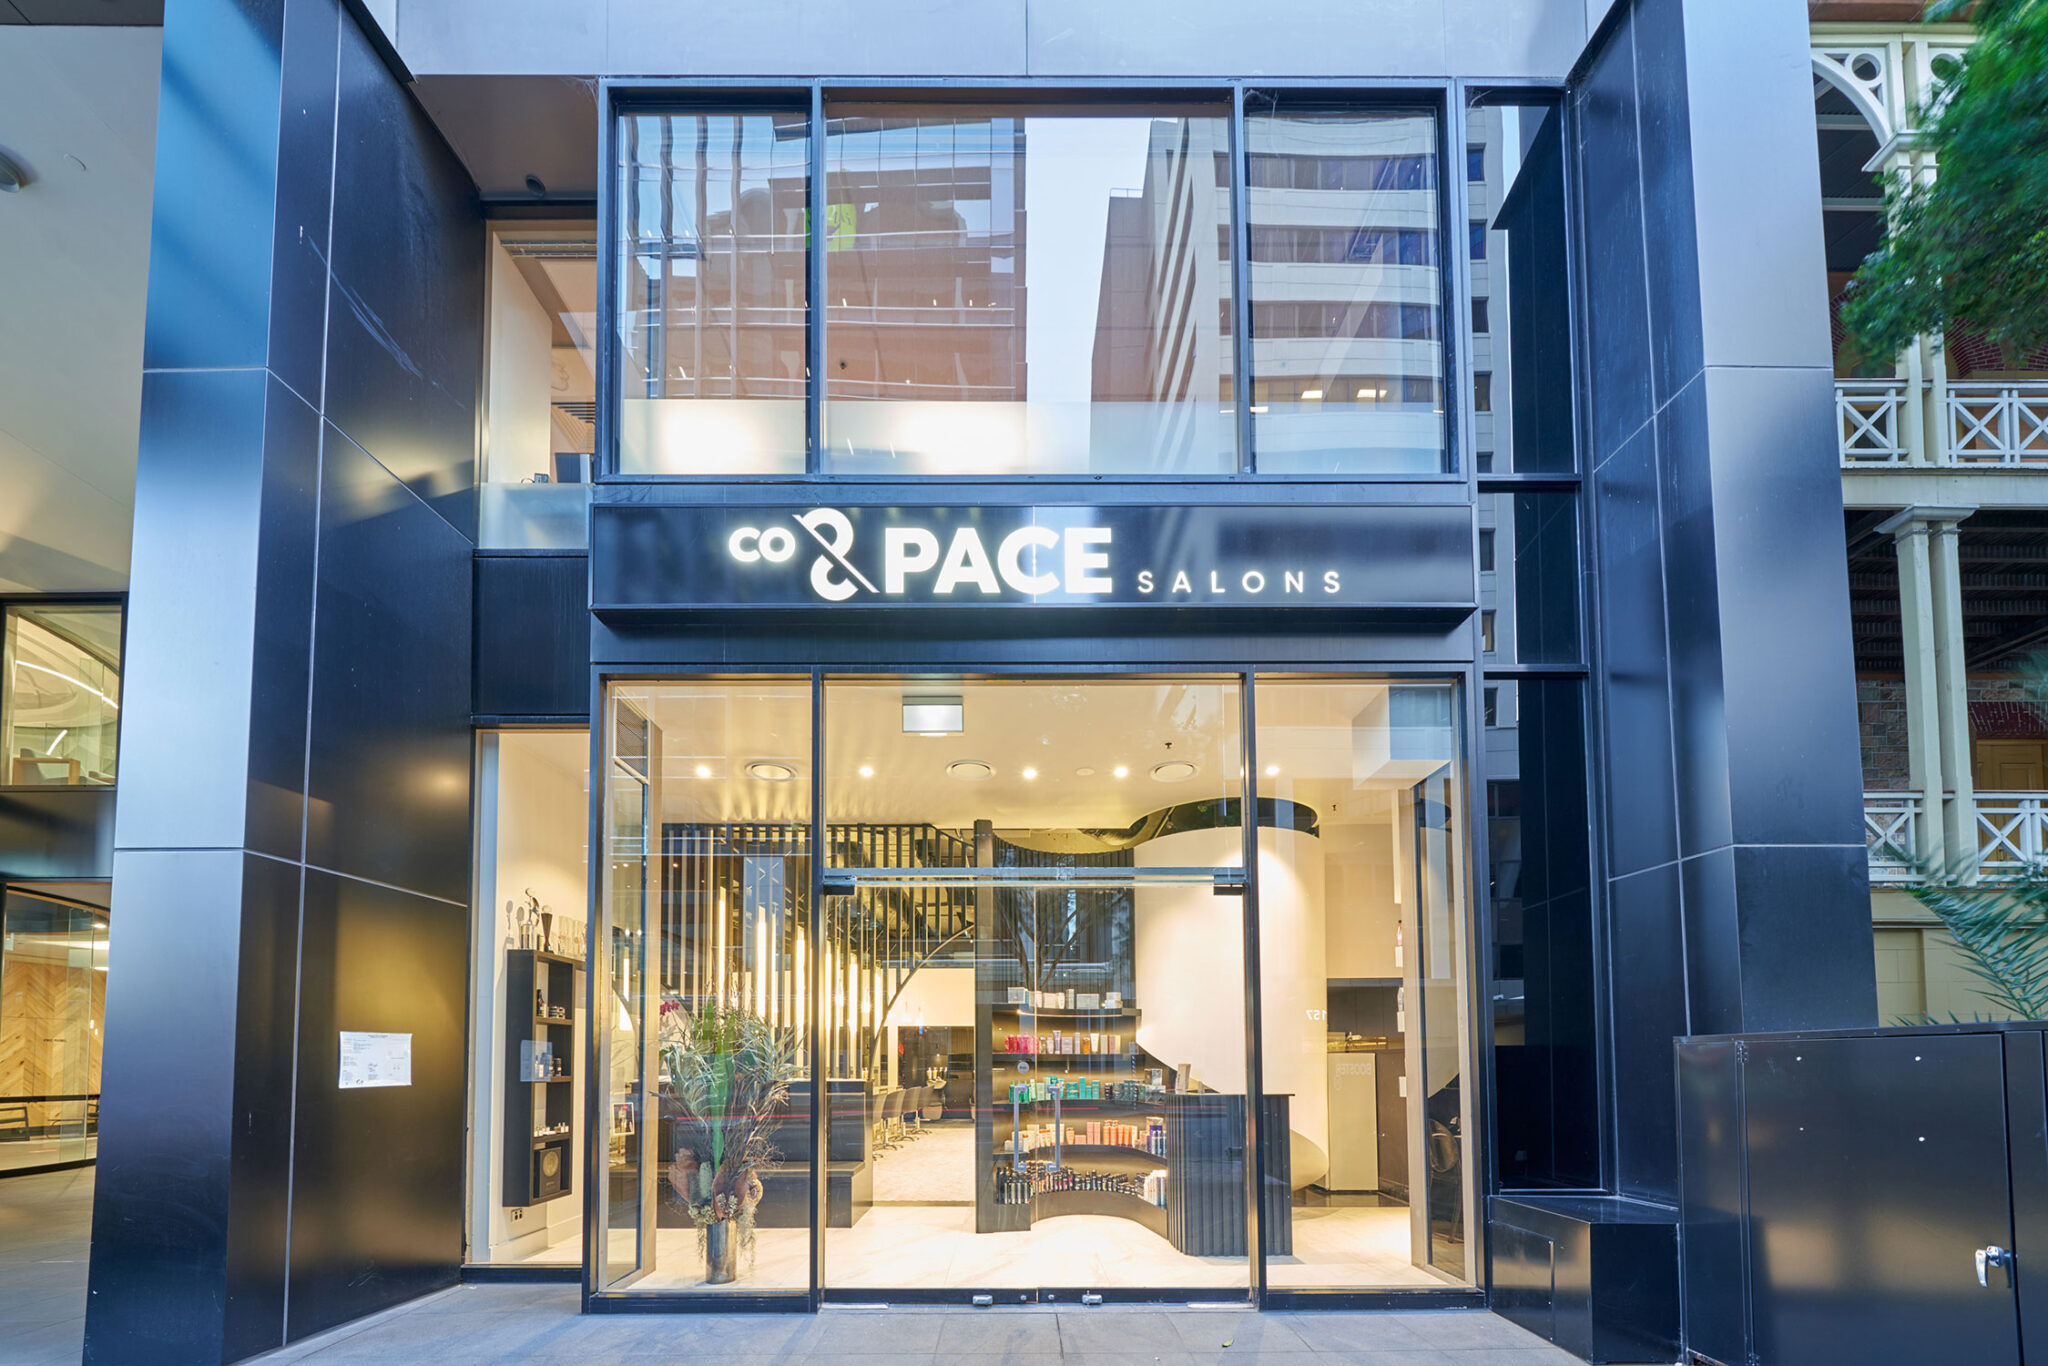 co and pace salons shop front